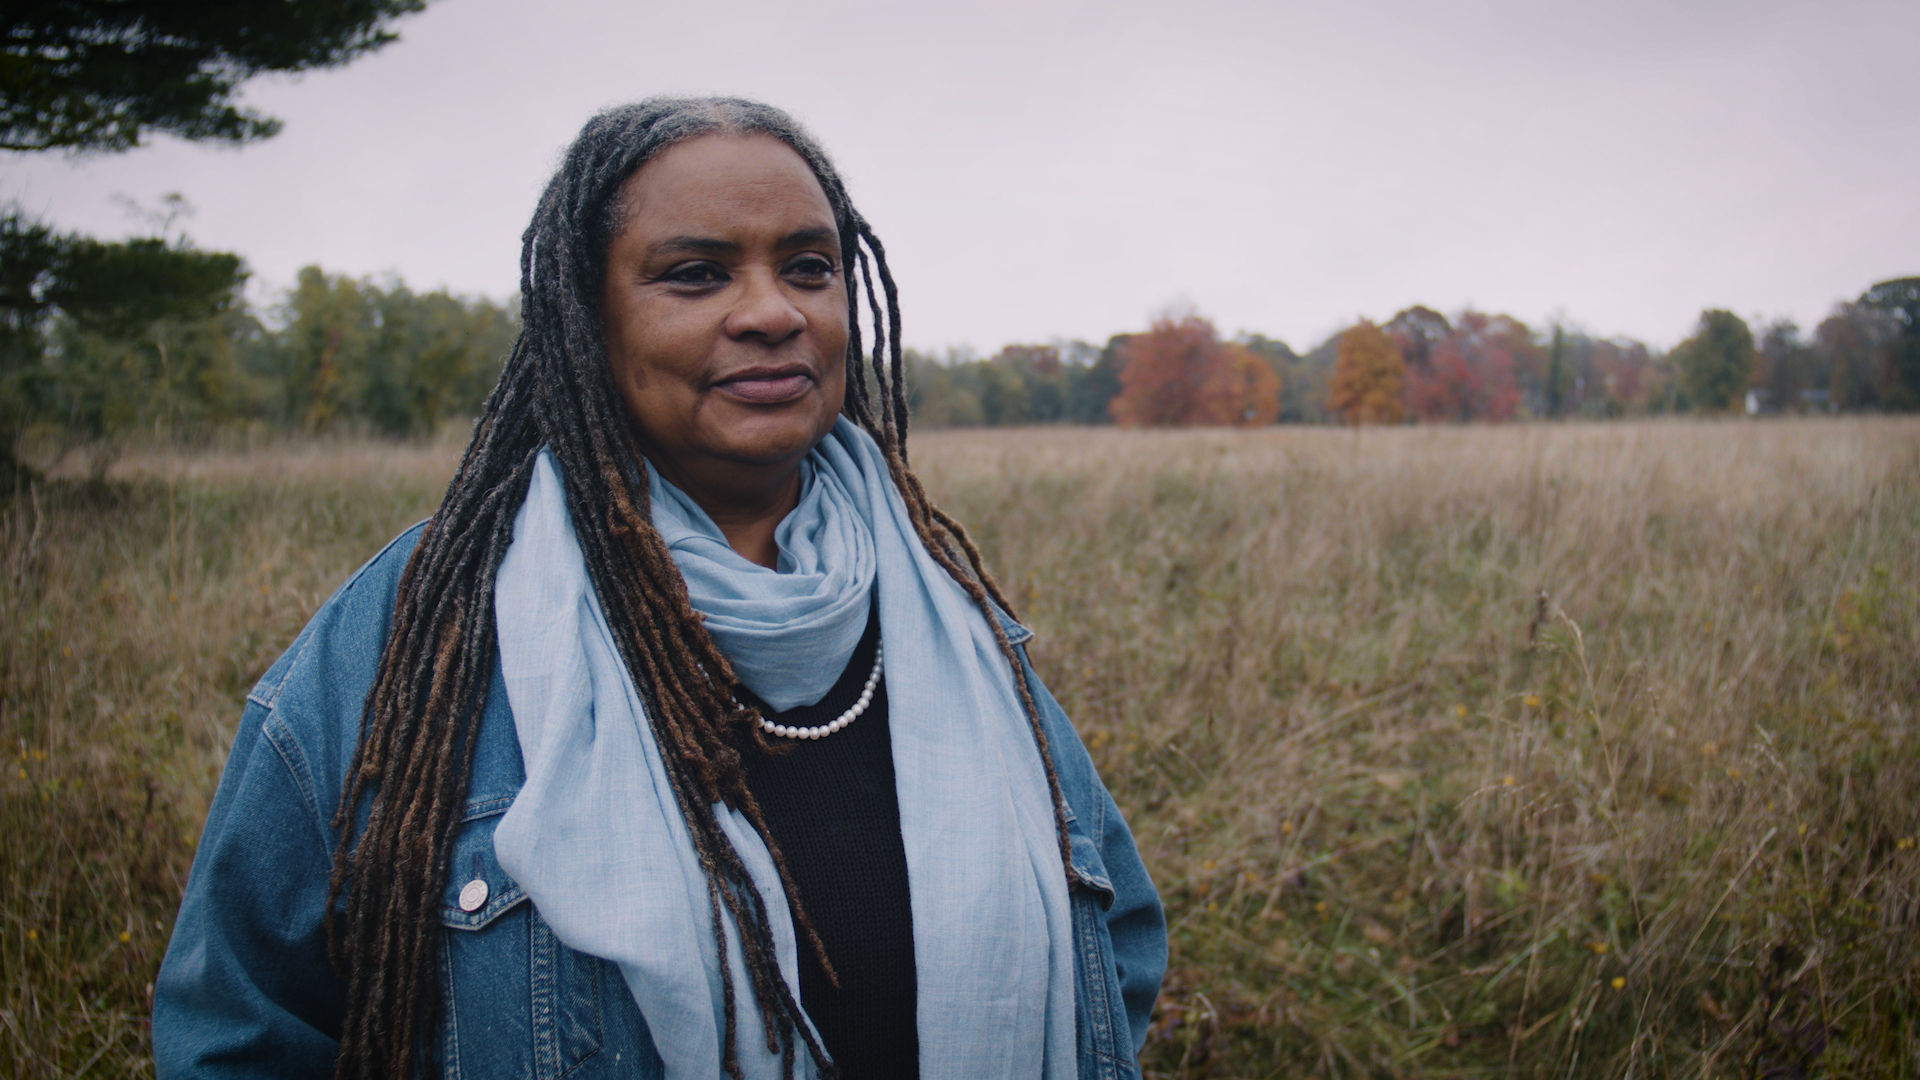 Donnamarie Barns, co-director of the Plain Sight Project and curator at Sylvester Manor Educational Farm on Shelter Island, as seen in 